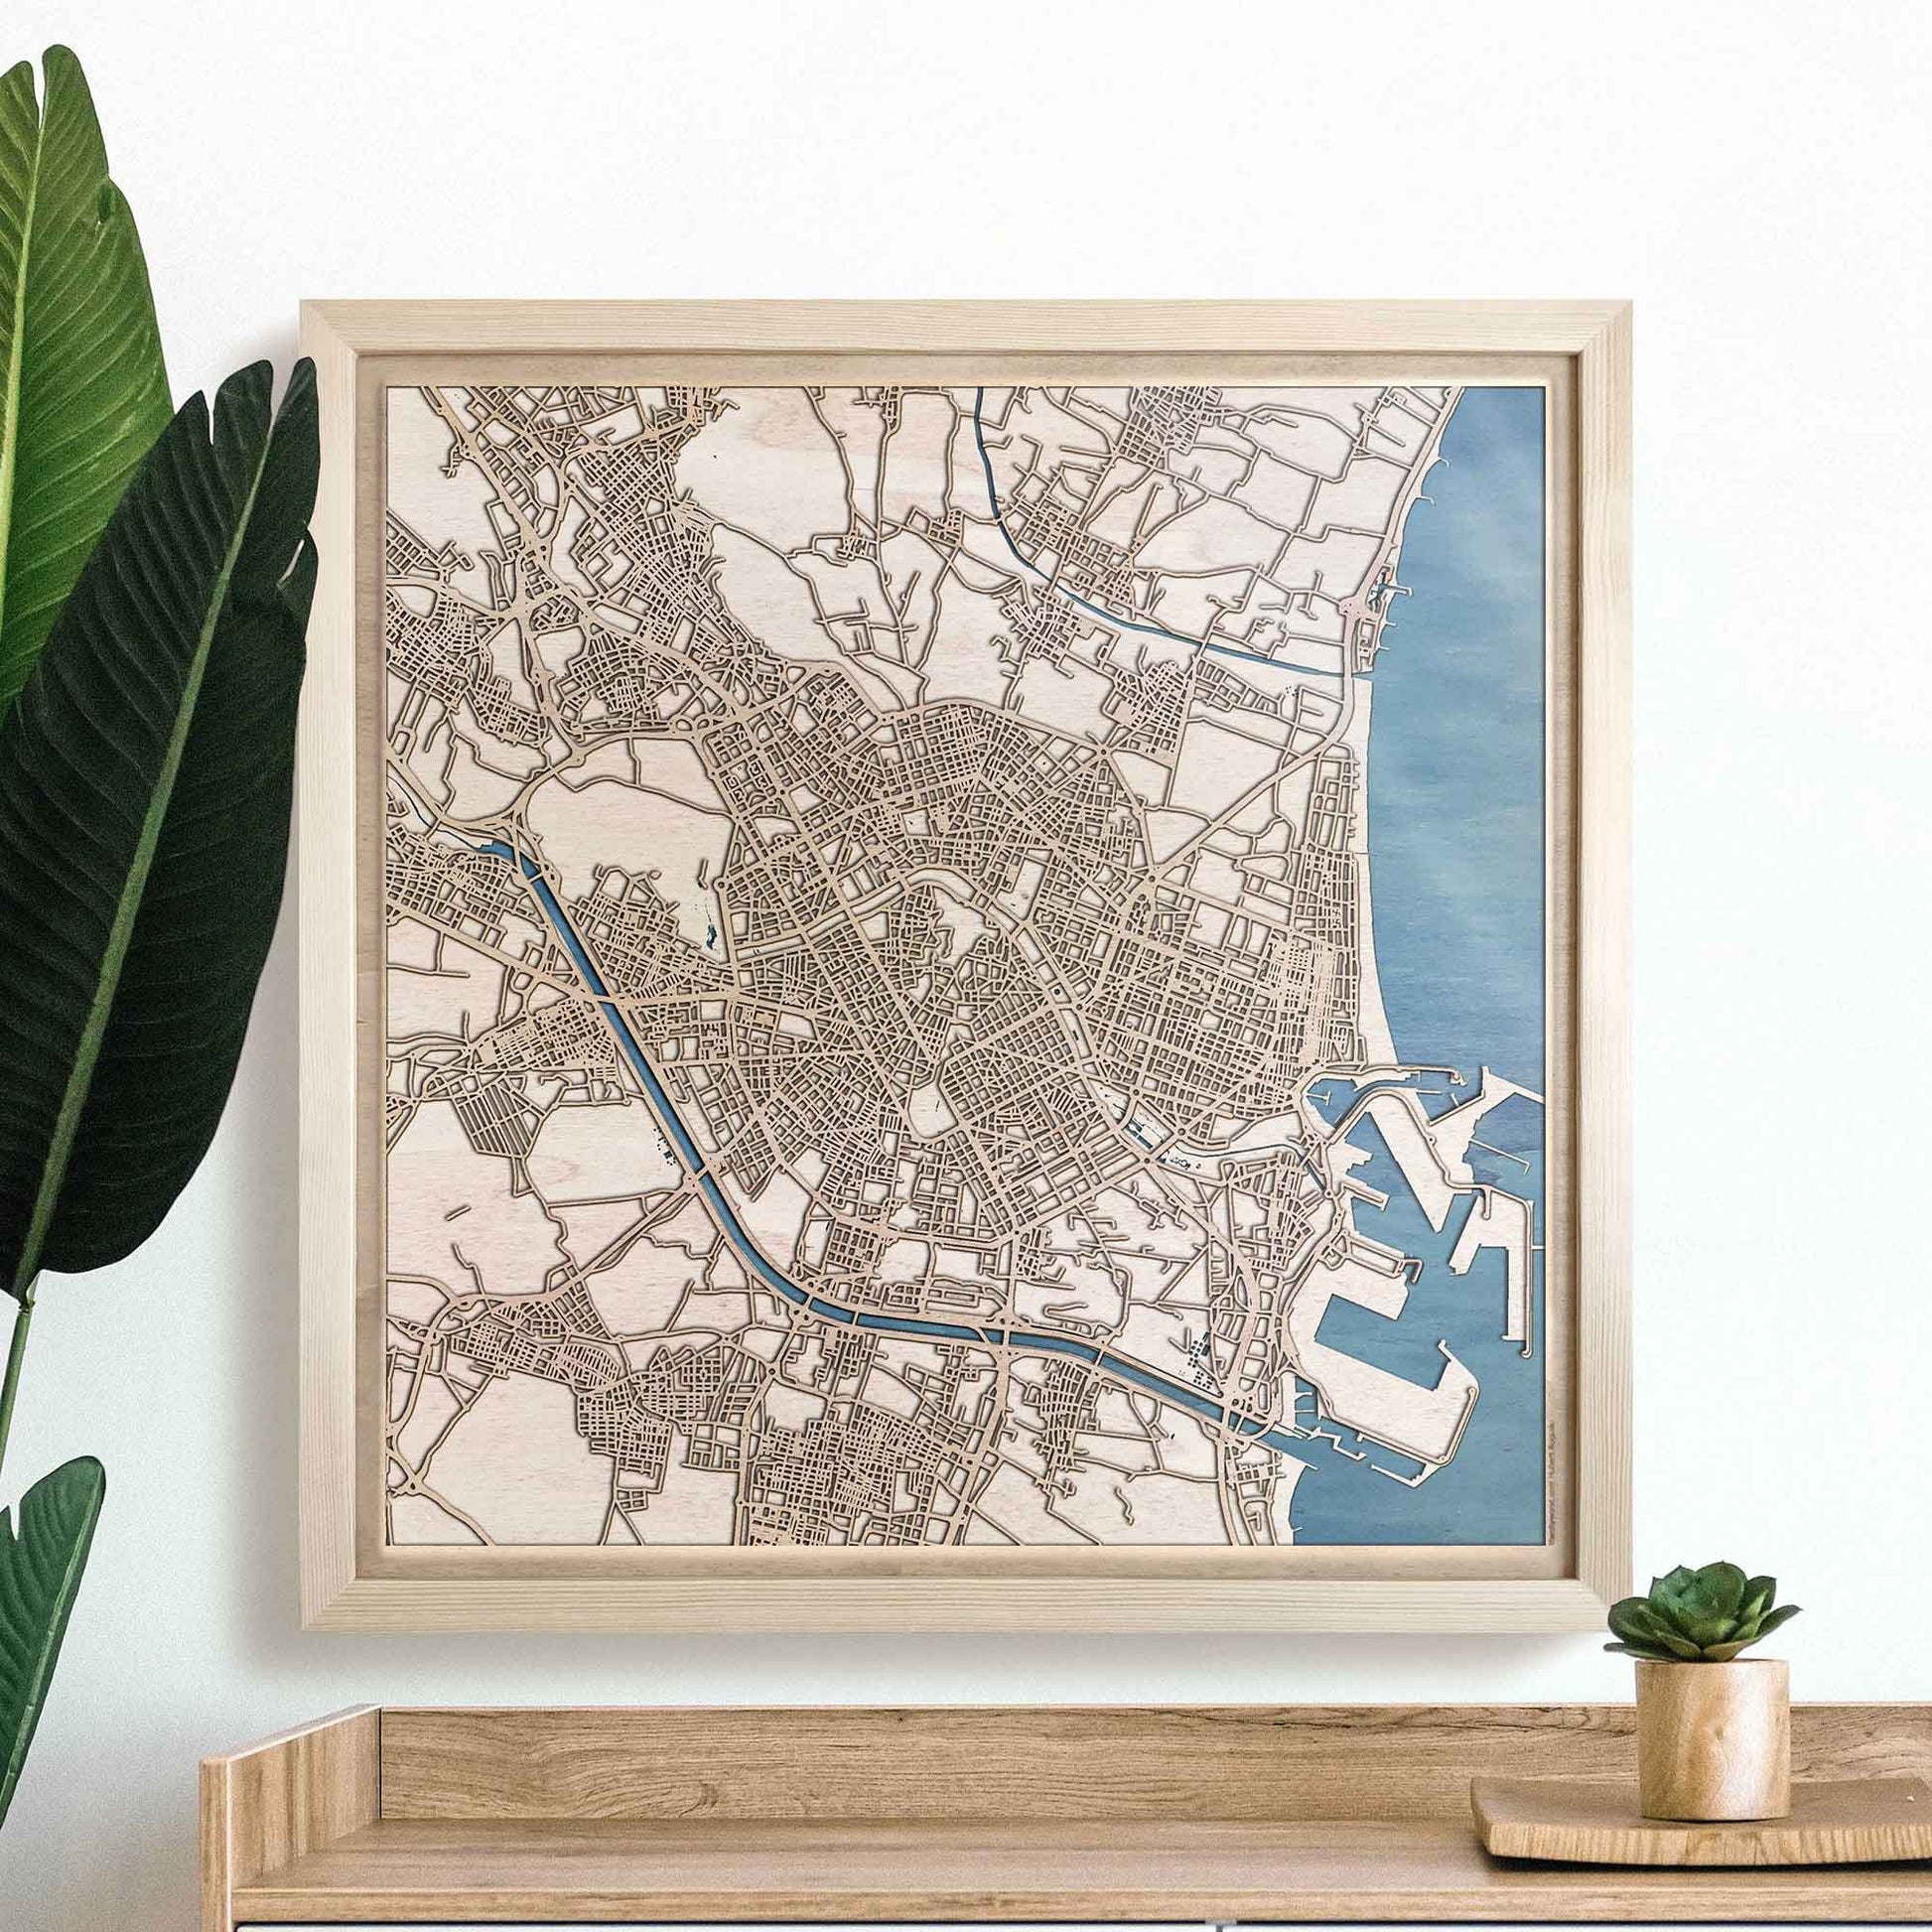 Valencia Wooden Map by CityWood - Custom Wood Map Art - Unique Laser Cut Engraved - Anniversary Gift